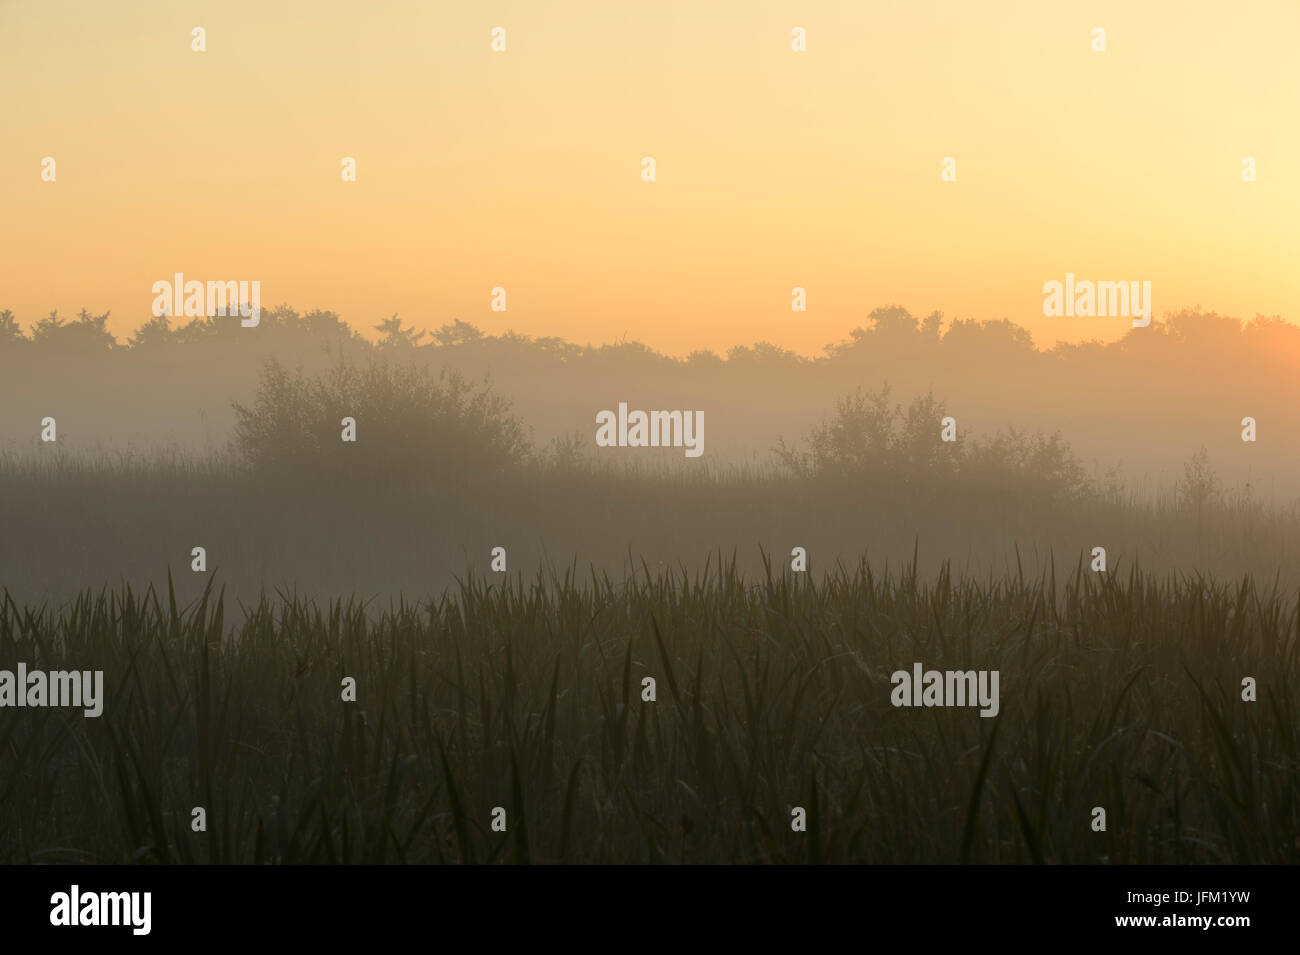 Summer sunrise with mist in a wetland area with reed beds. Klein Bylaer, Barneveld, Netherlands, Europe Stock Photo